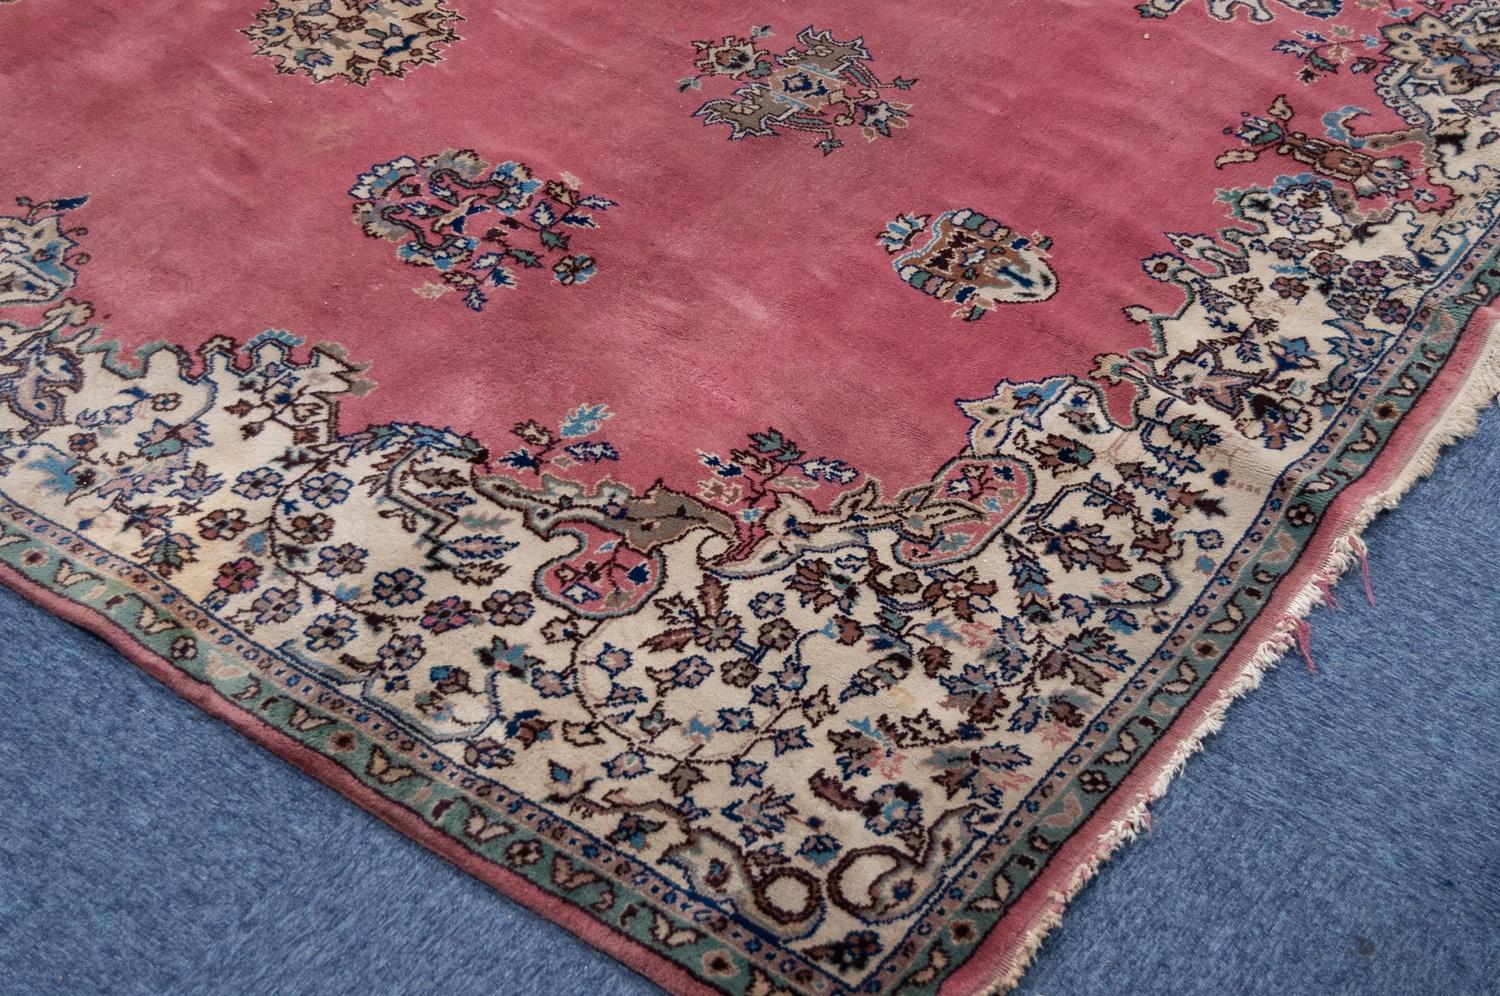 LARGE, POSSIBLY EUROPEAN, PERSIAN STYLE CARPET, having a rose pink field, large green, brown and - Image 2 of 3